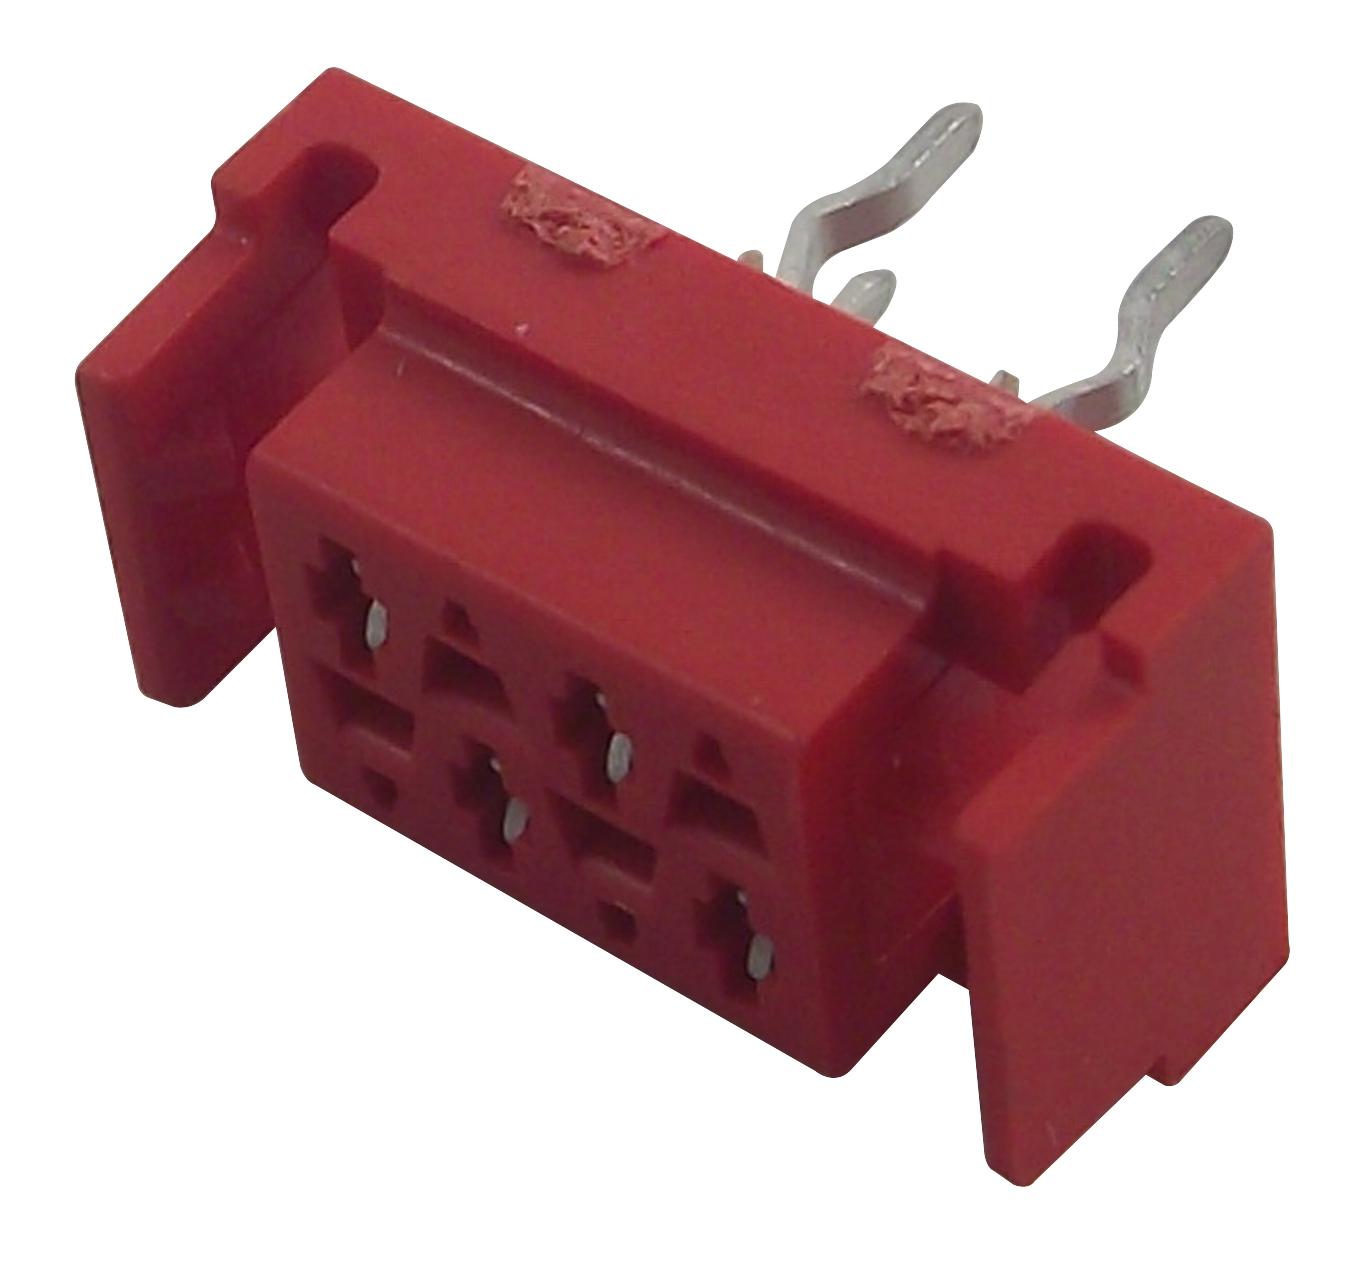 338068-4 CONNECTOR, RCPT, 4POS, 2ROW, 1.27MM AMP - TE CONNECTIVITY